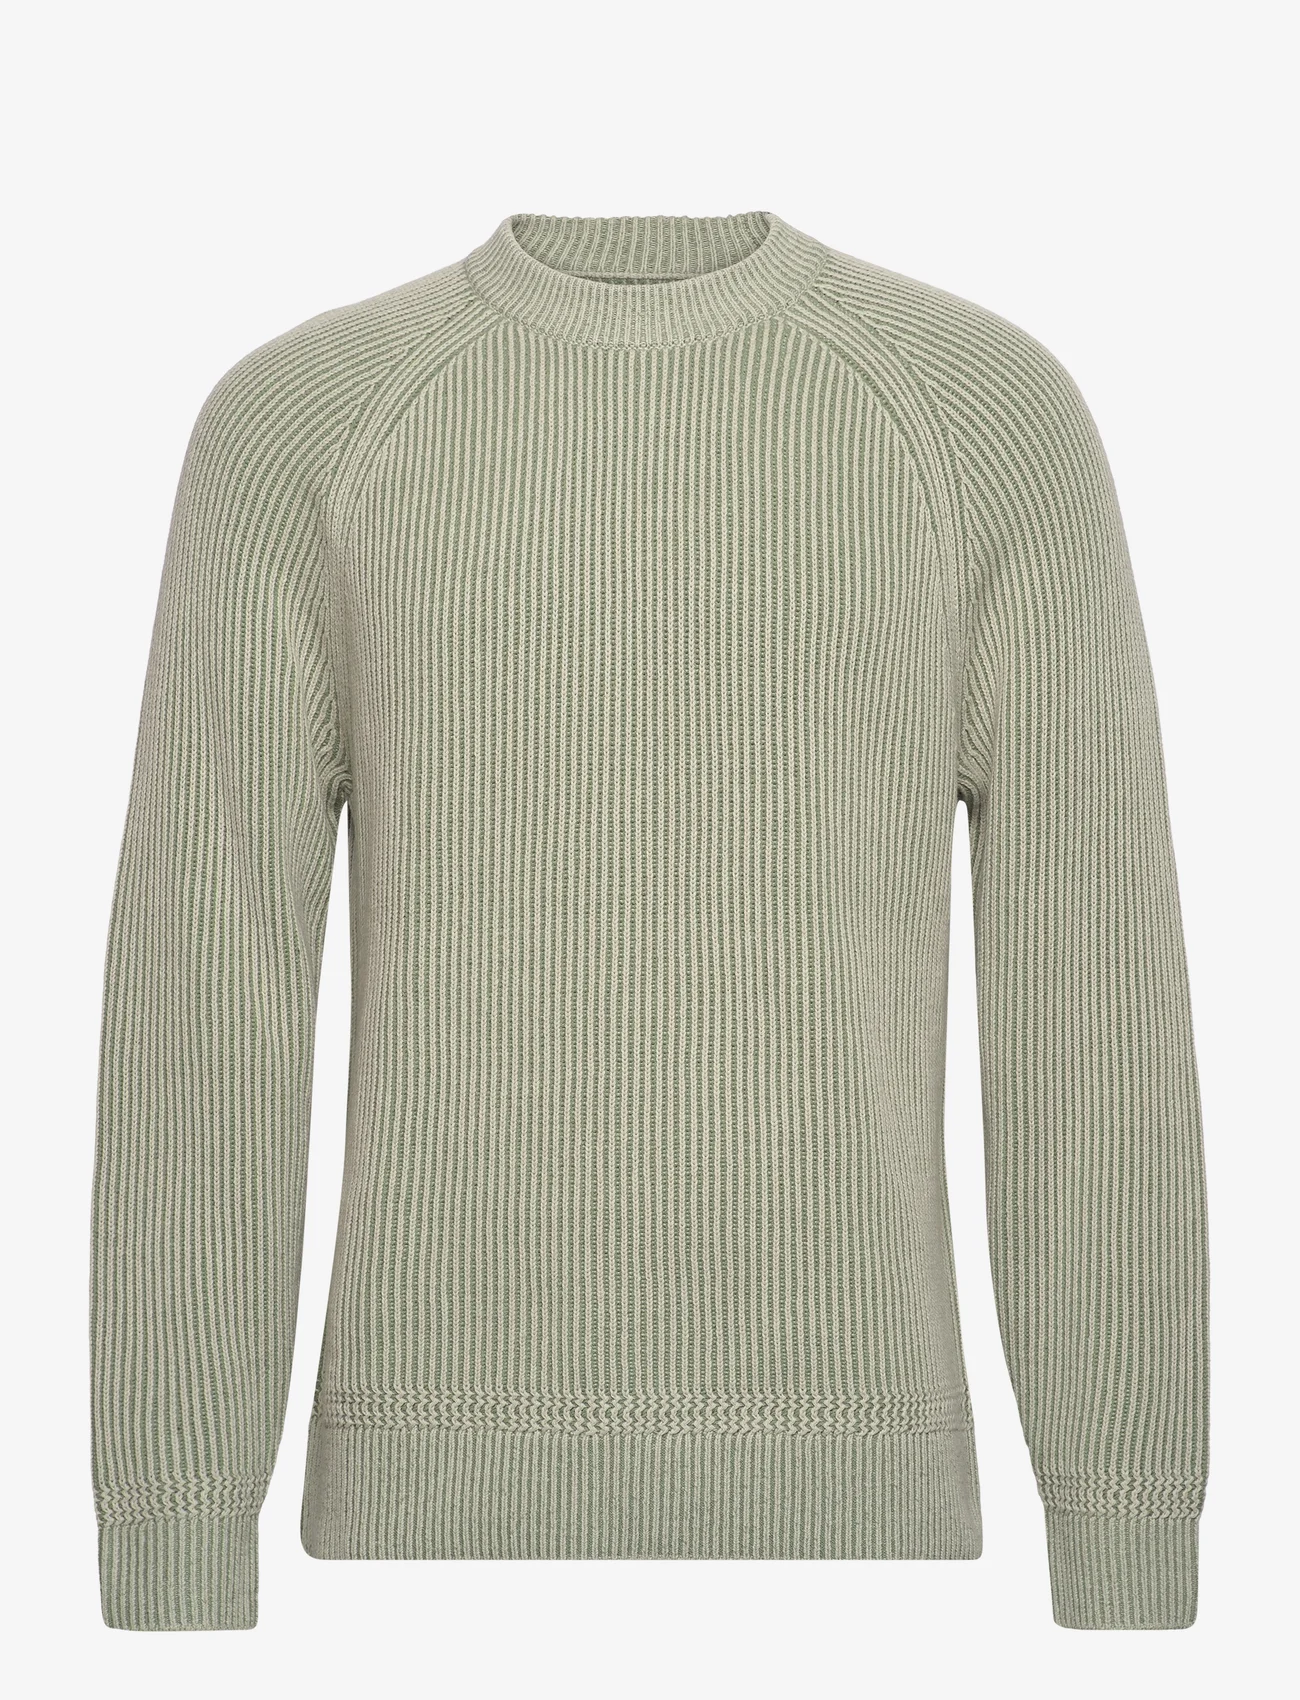 Abercrombie & Fitch - ANF MENS SWEATERS - rundhals - green - 0